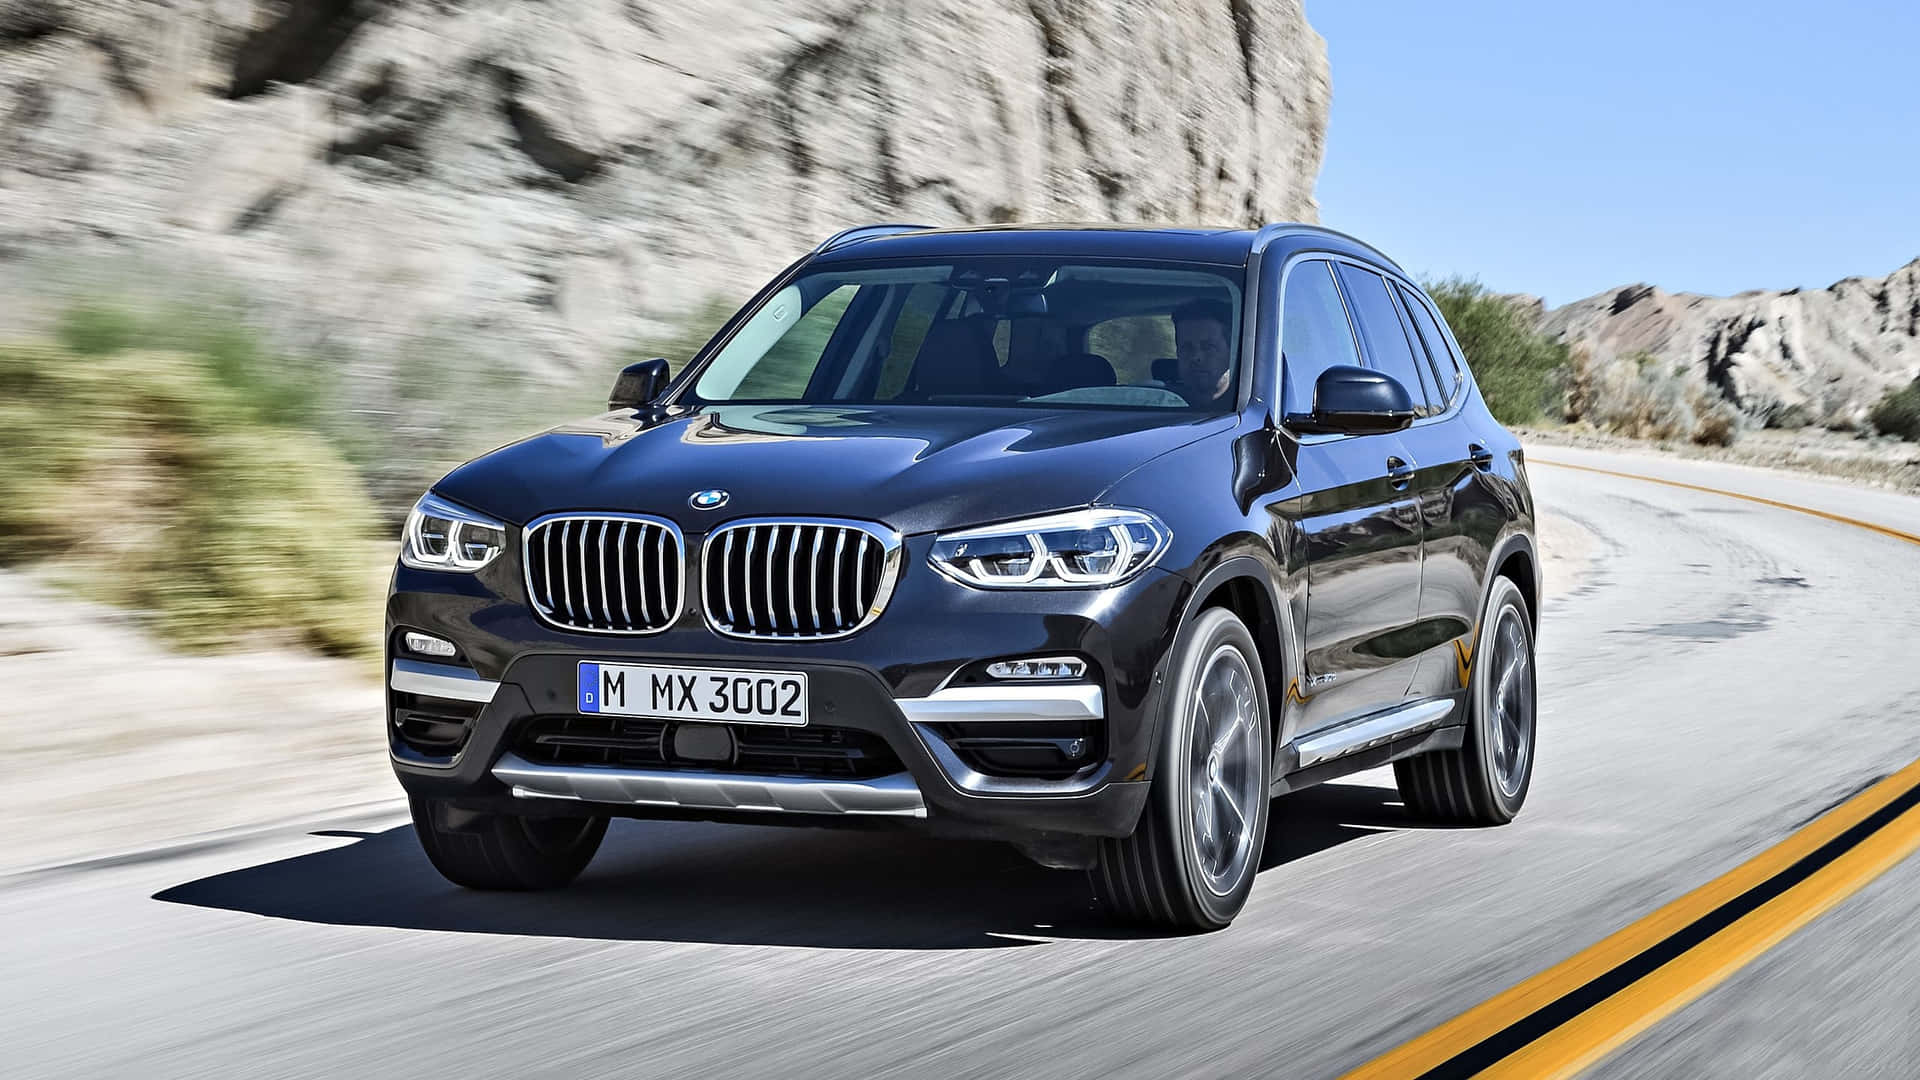 Sleek and Stylish BMW X3 on the Road Wallpaper